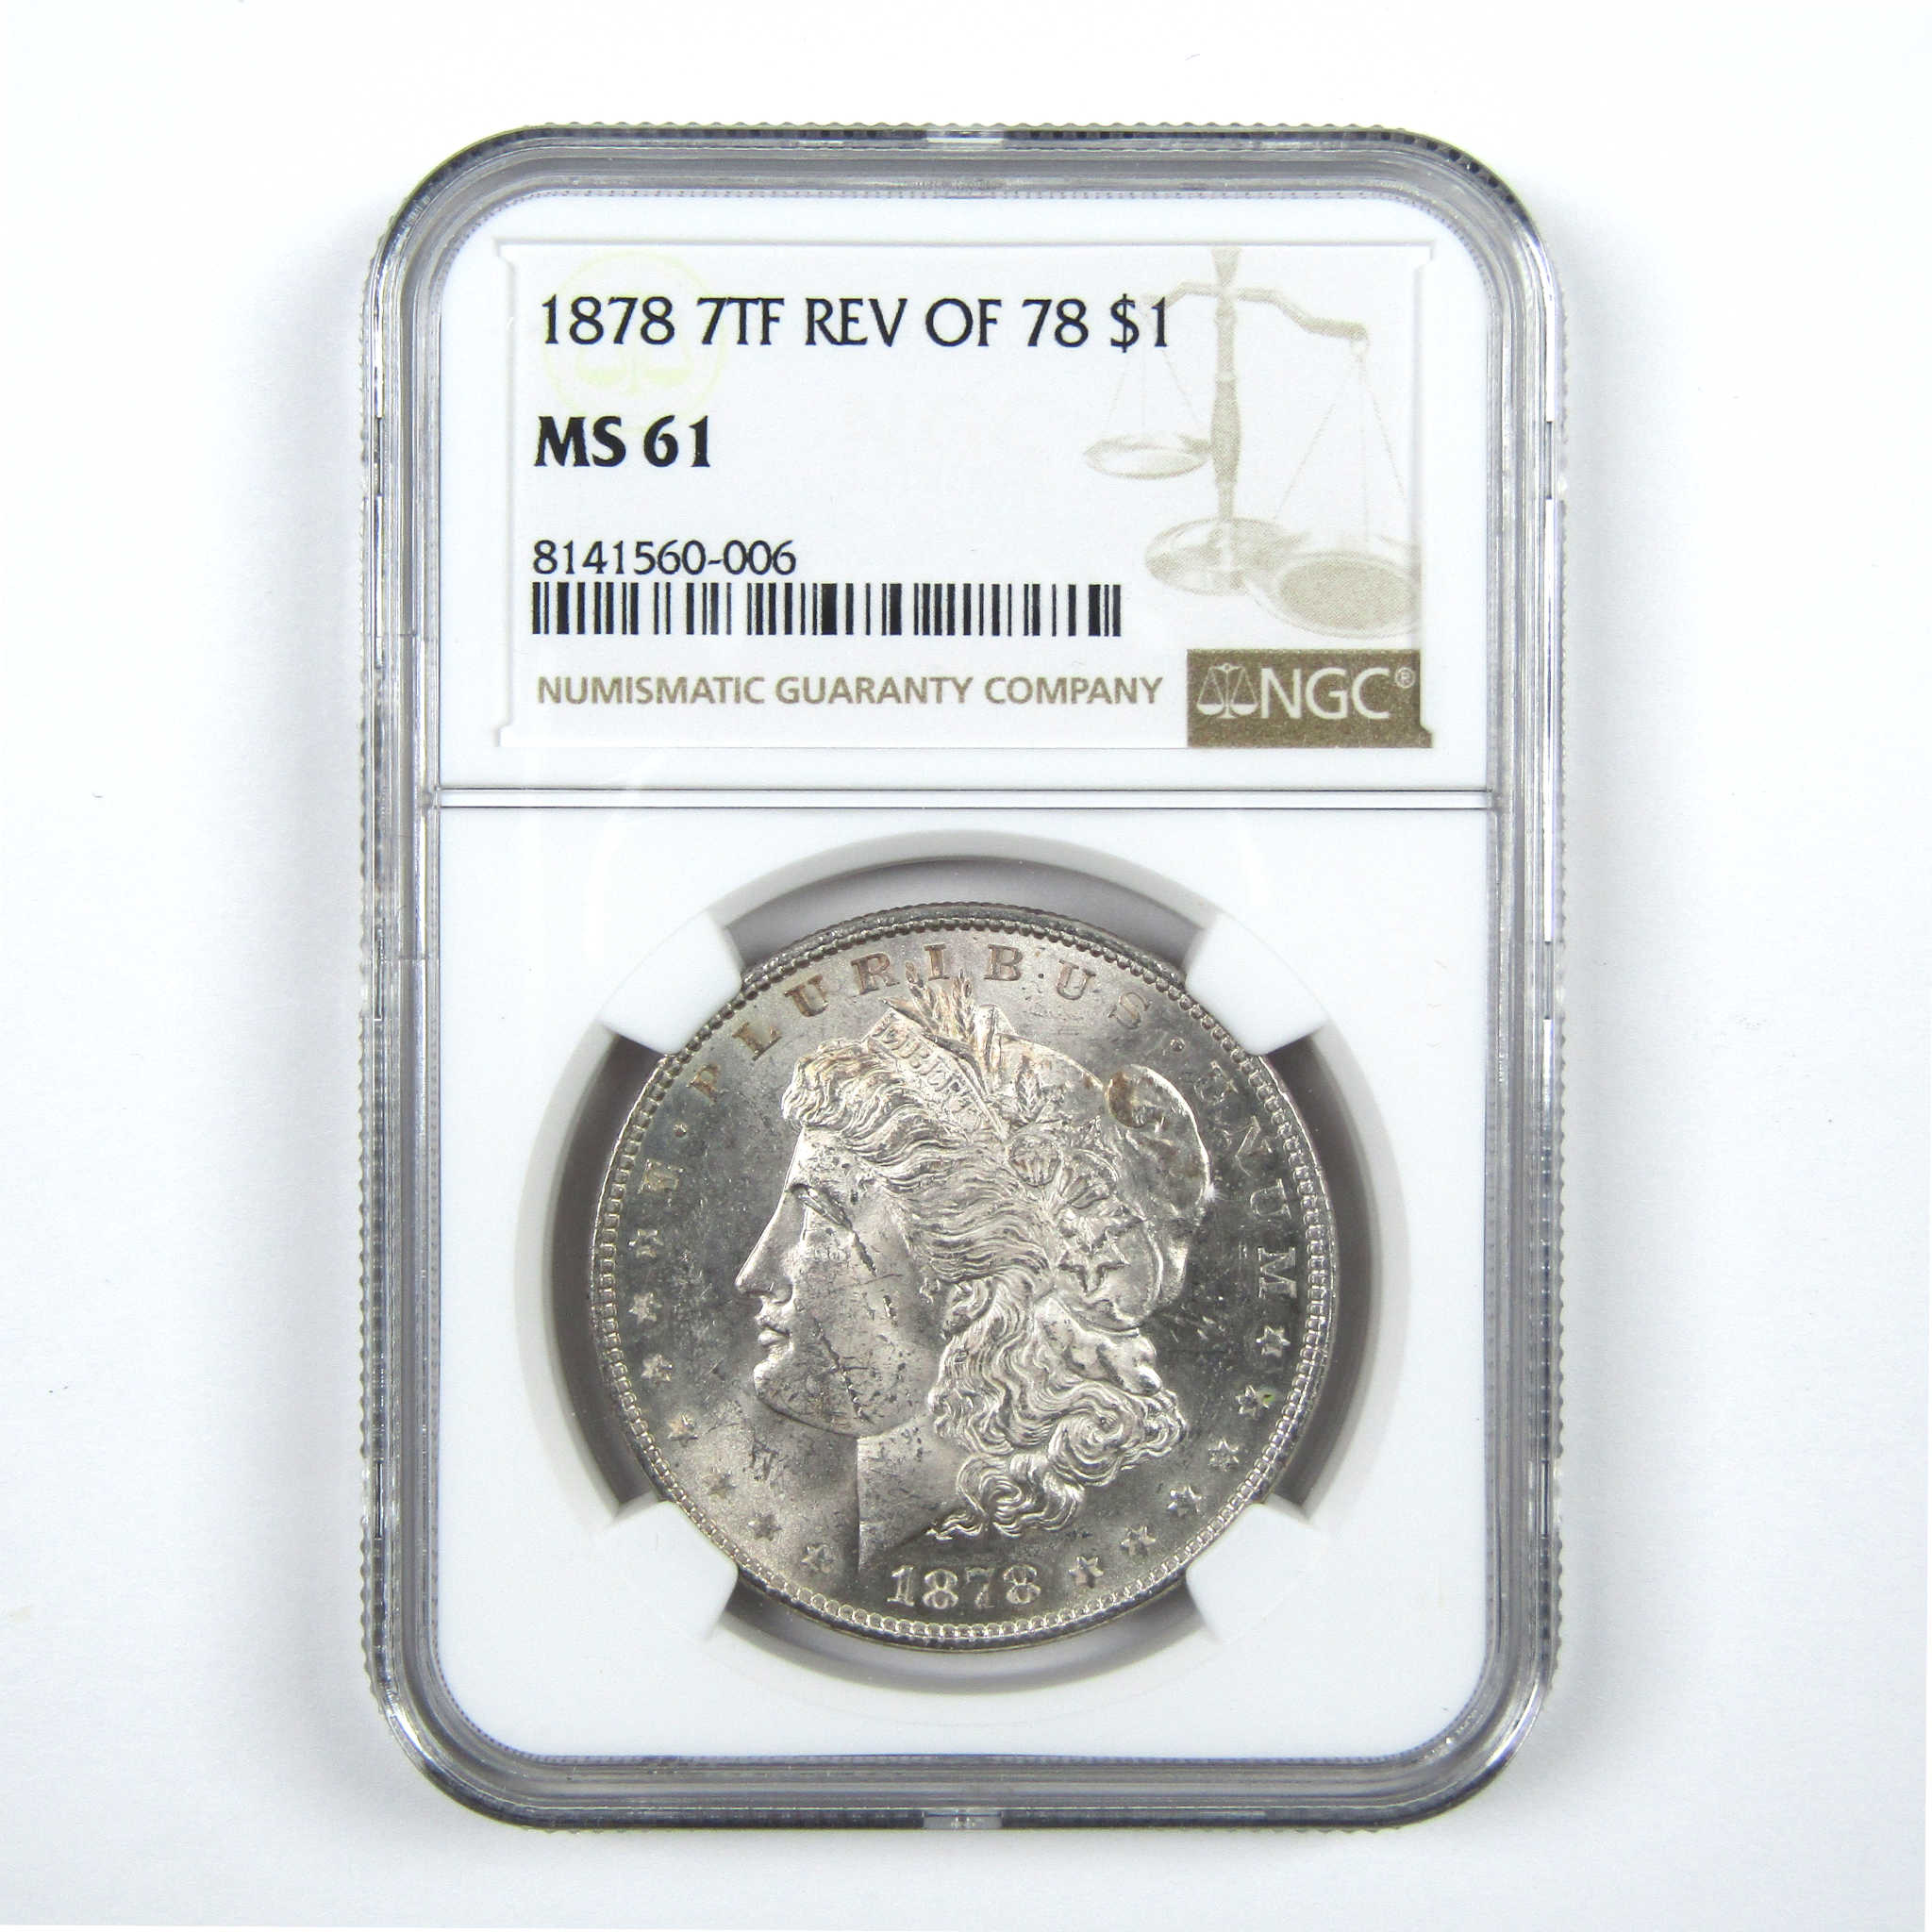 1878 7TF Rev 78 Morgan Dollar MS 61 NGC Uncirculated SKU:I14030 - Morgan coin - Morgan silver dollar - Morgan silver dollar for sale - Profile Coins &amp; Collectibles